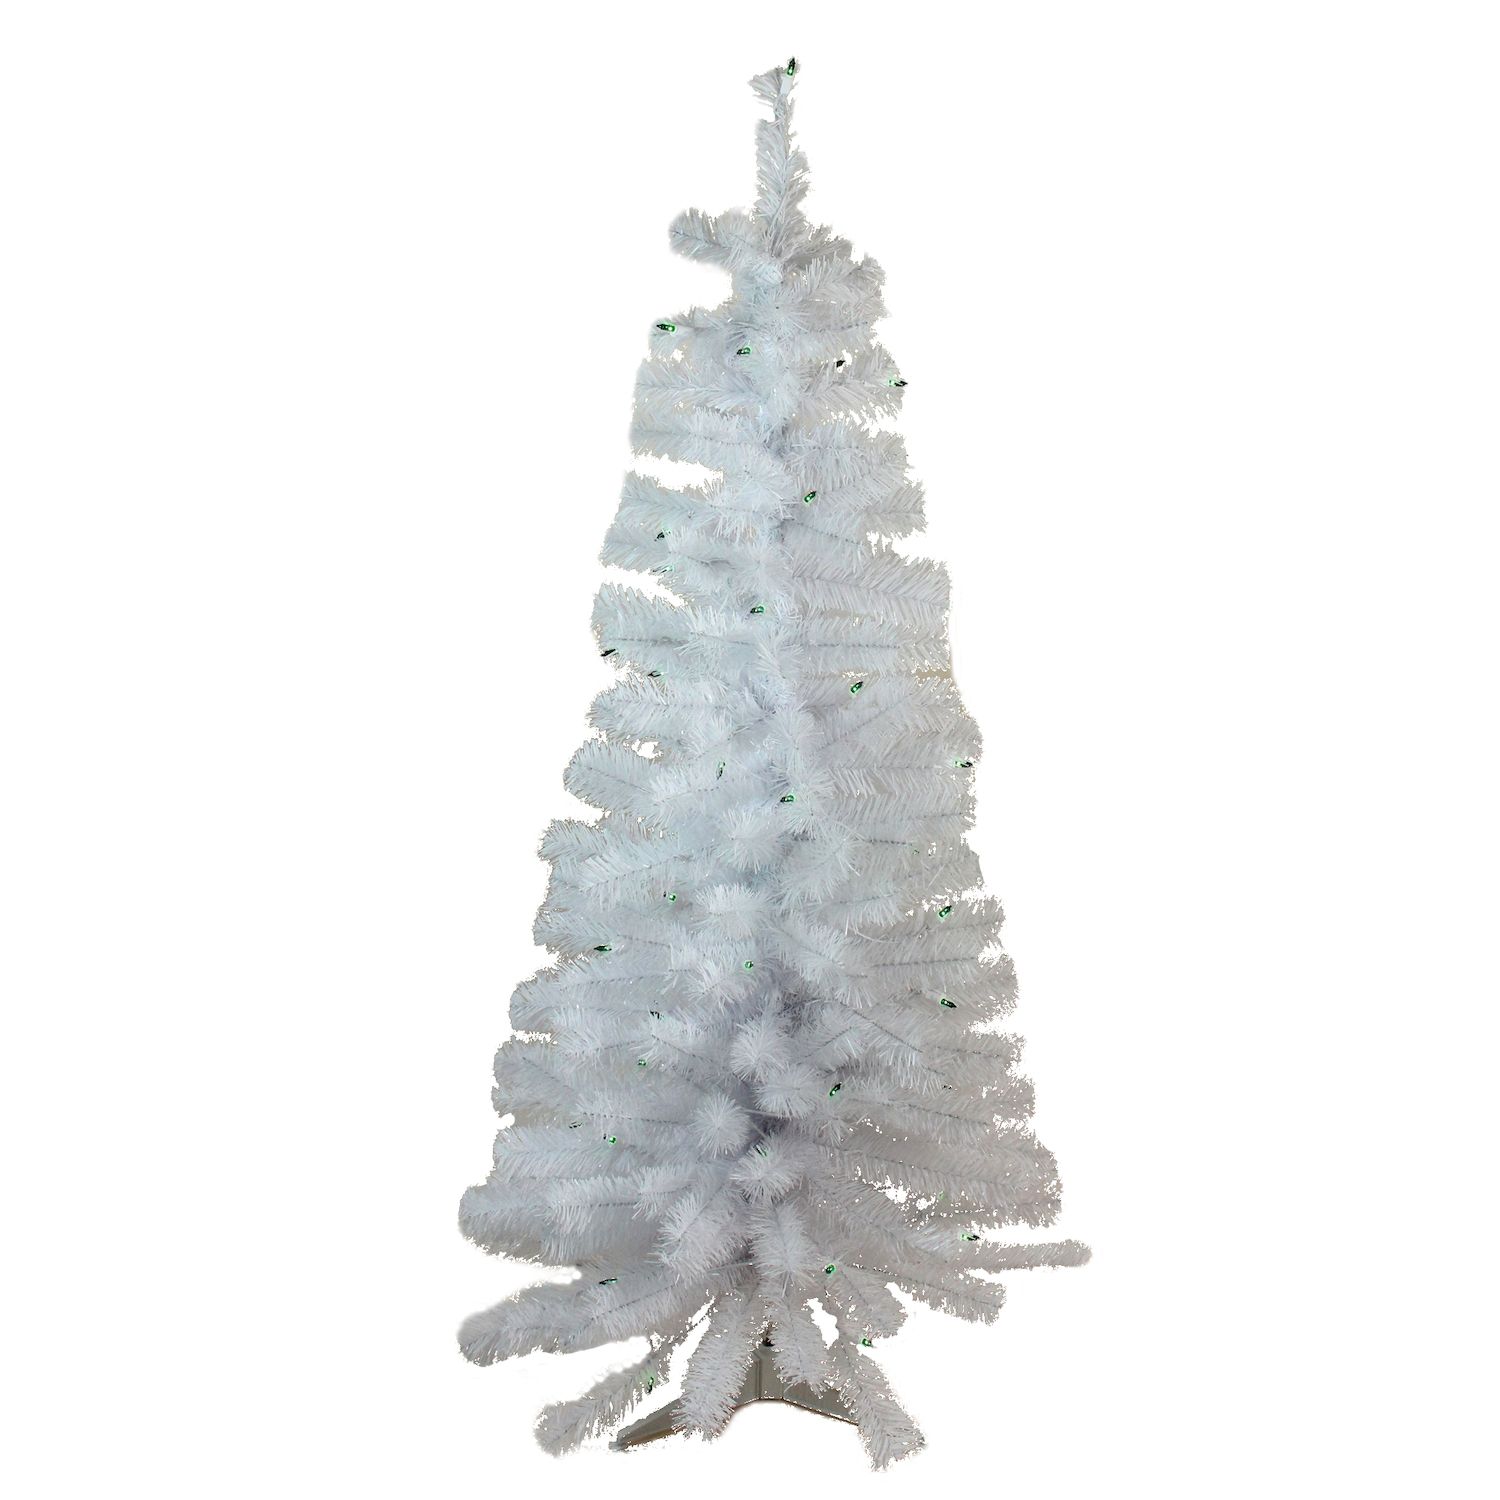 Northlight 2' Lighted Rockport White Pine Artificial Christmas Tree Green Lights